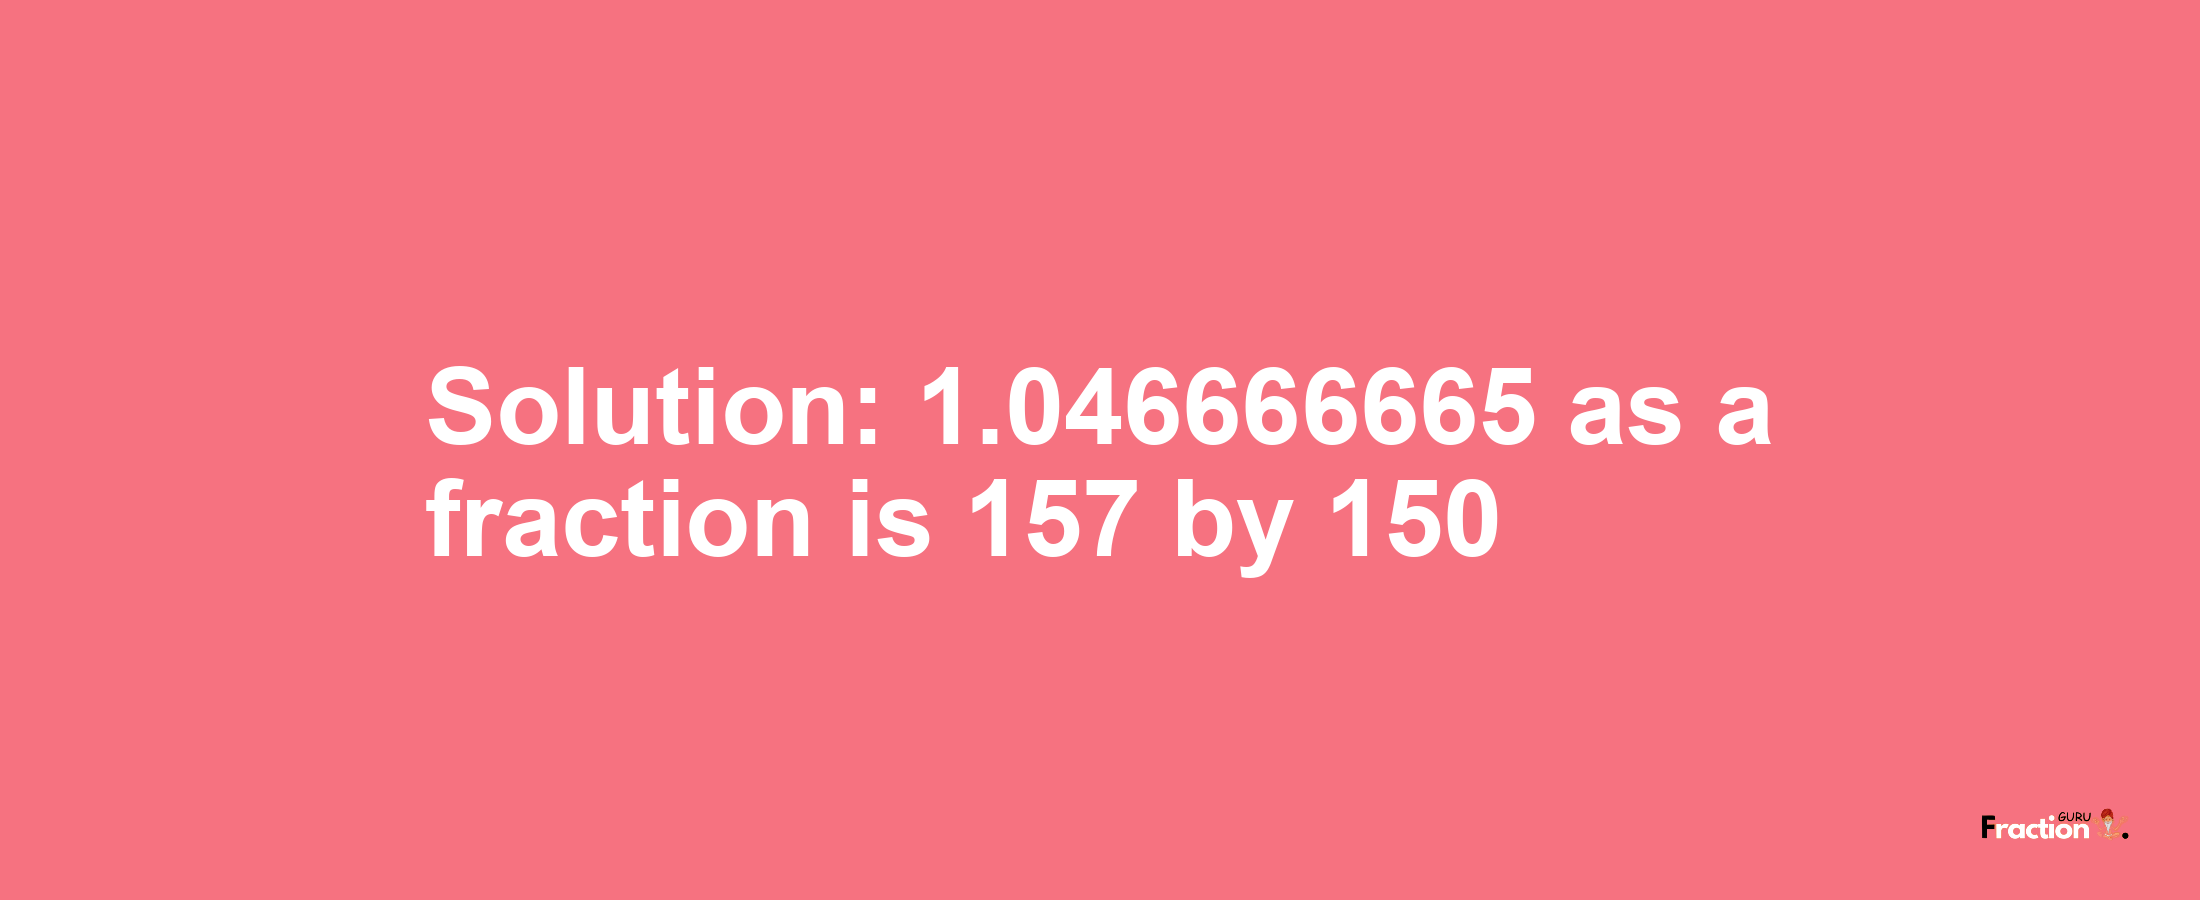 Solution:1.046666665 as a fraction is 157/150